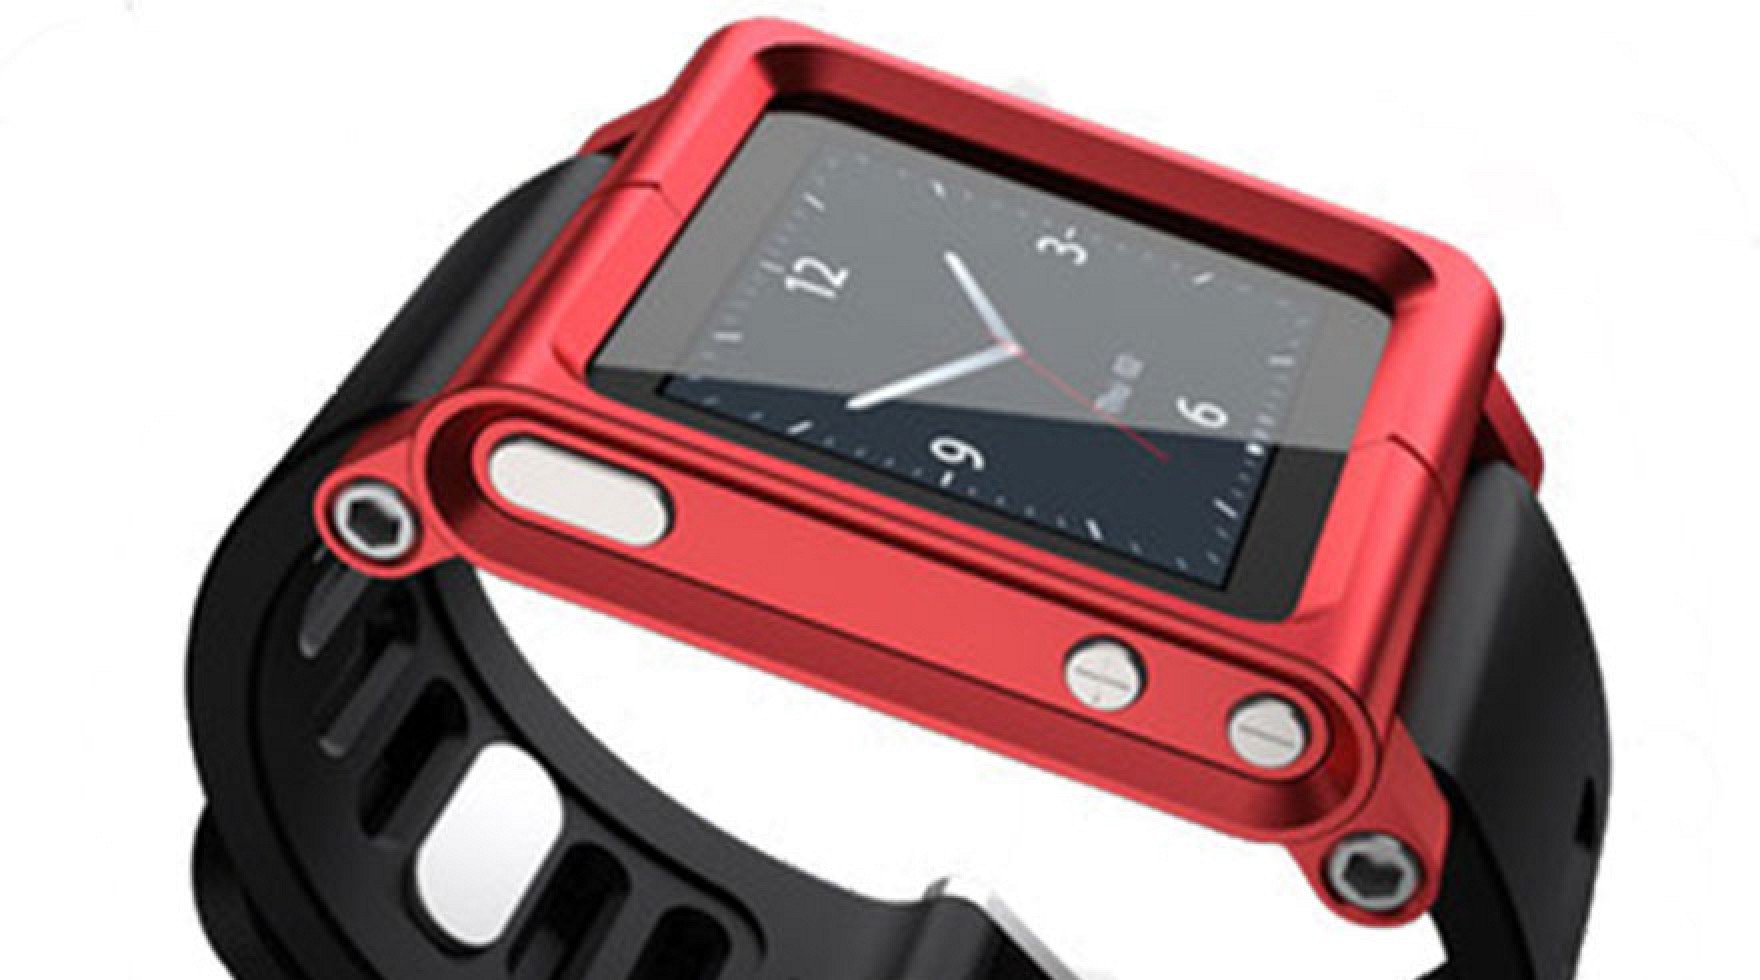 Analyst Believes iWatch Will Feature Home Automation, Be ...
